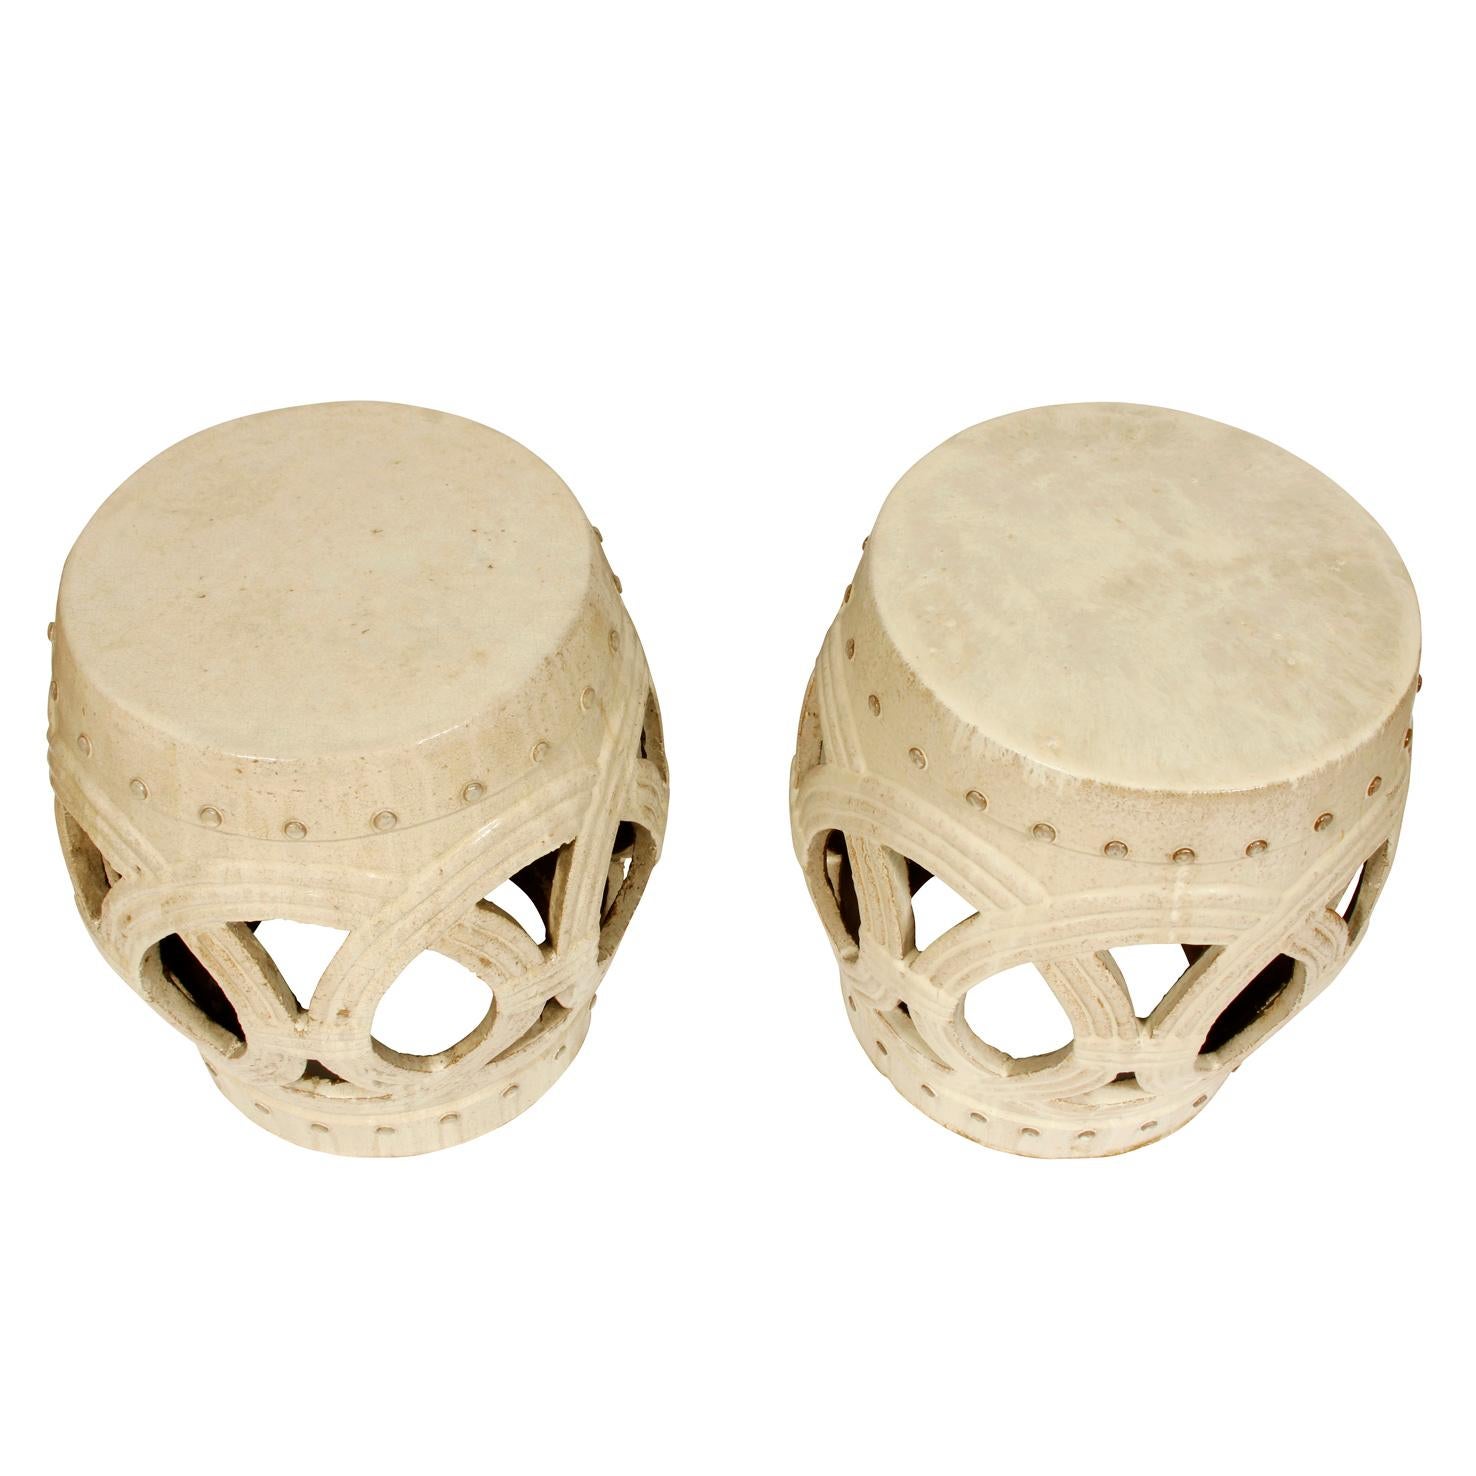 Garden stools are beautiful and versatile, inside or out of doors. This pair, in a creamy white, features an open ring pattern. Perfect for a drinks table in any room and a great way to add a different texture in a room.